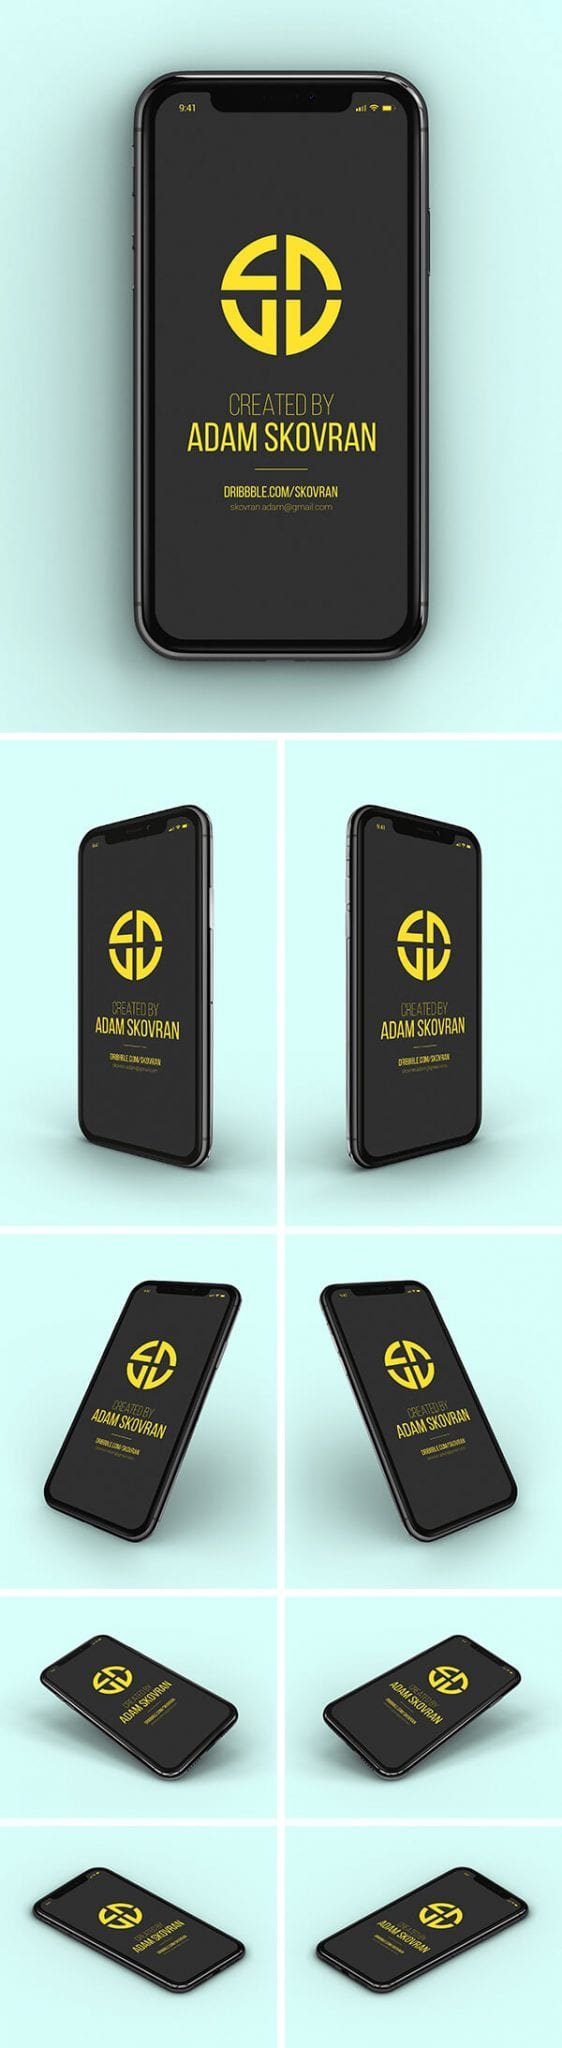 iPhone X MockUps from 9 Different Angles